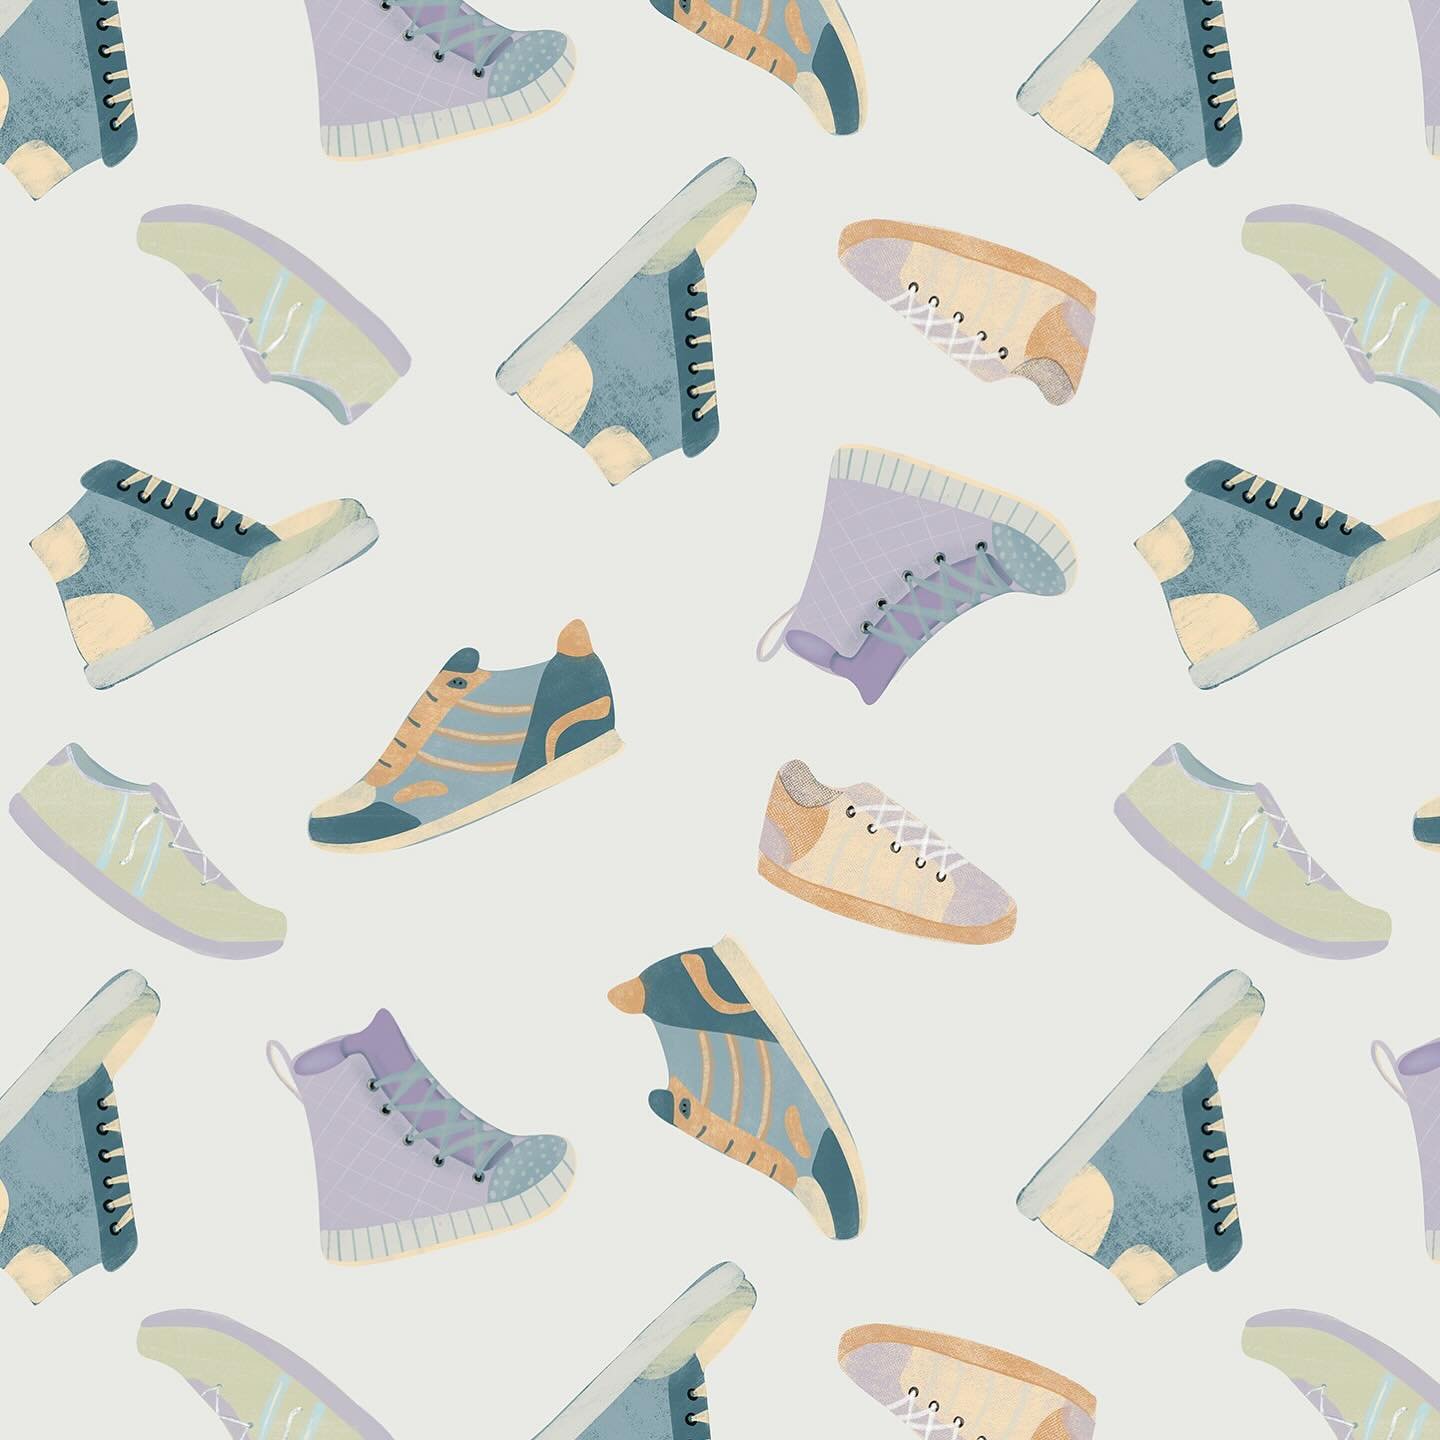 Love how this sneaker pattern turned out for the @creative_studio_collective art call for @jordanporter.handmade was so much fun drawing sneakers!!! 👟